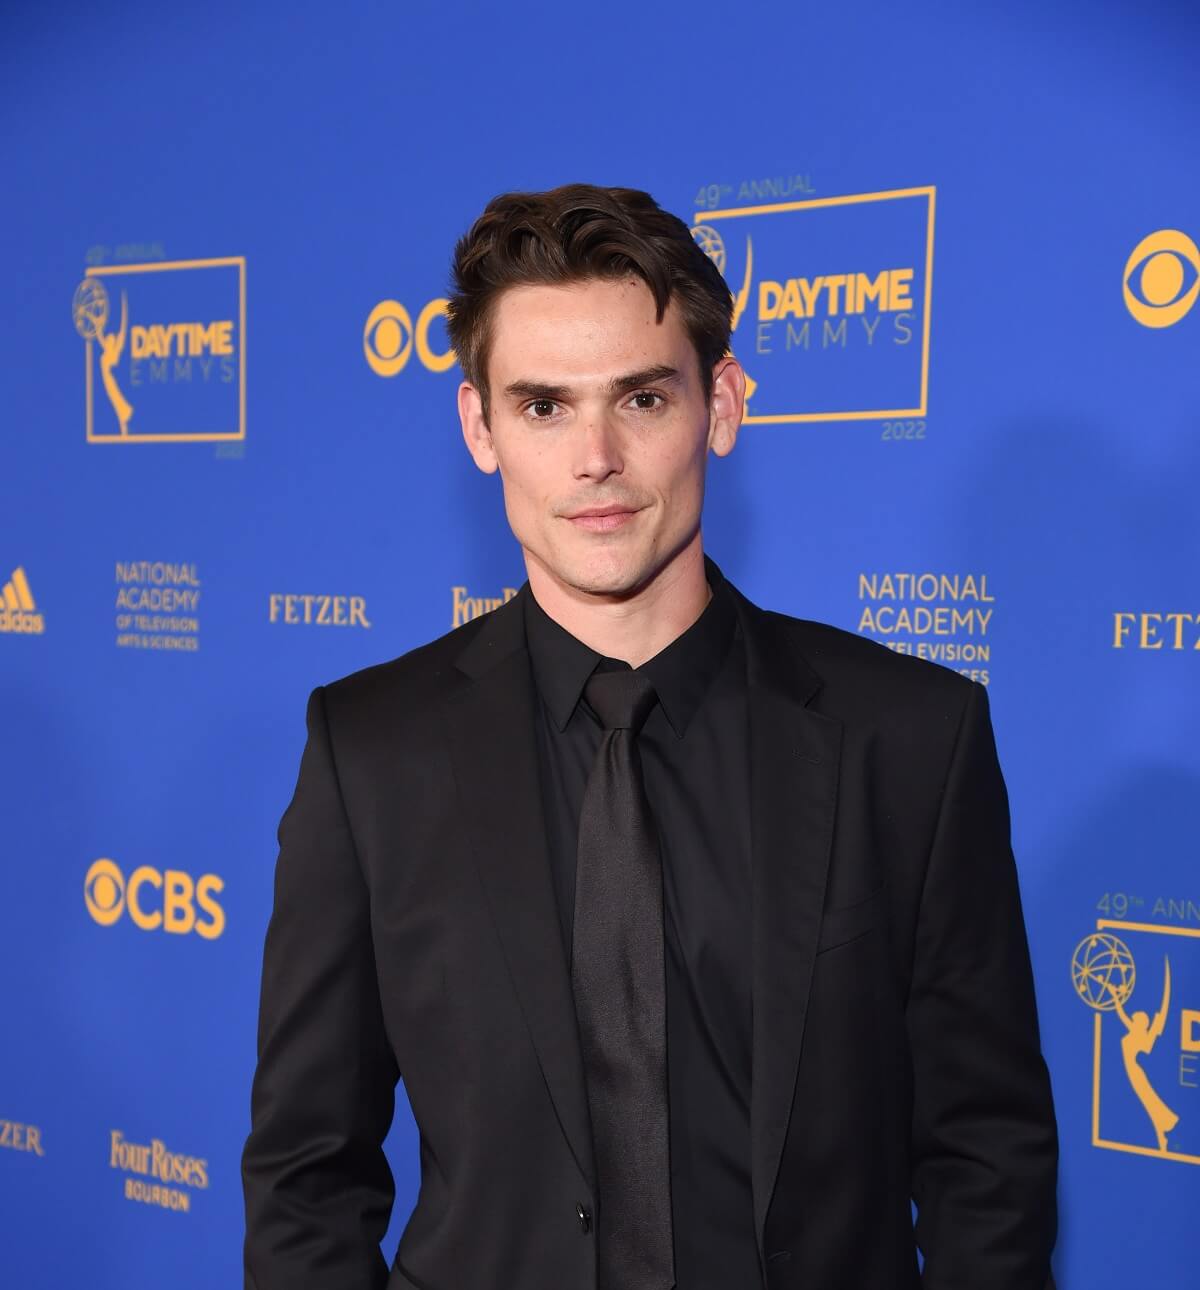 'The Young and the Restless' star Mark Grossman in a black suit posing on the red carpet of the 2022 Daytime Emmys.